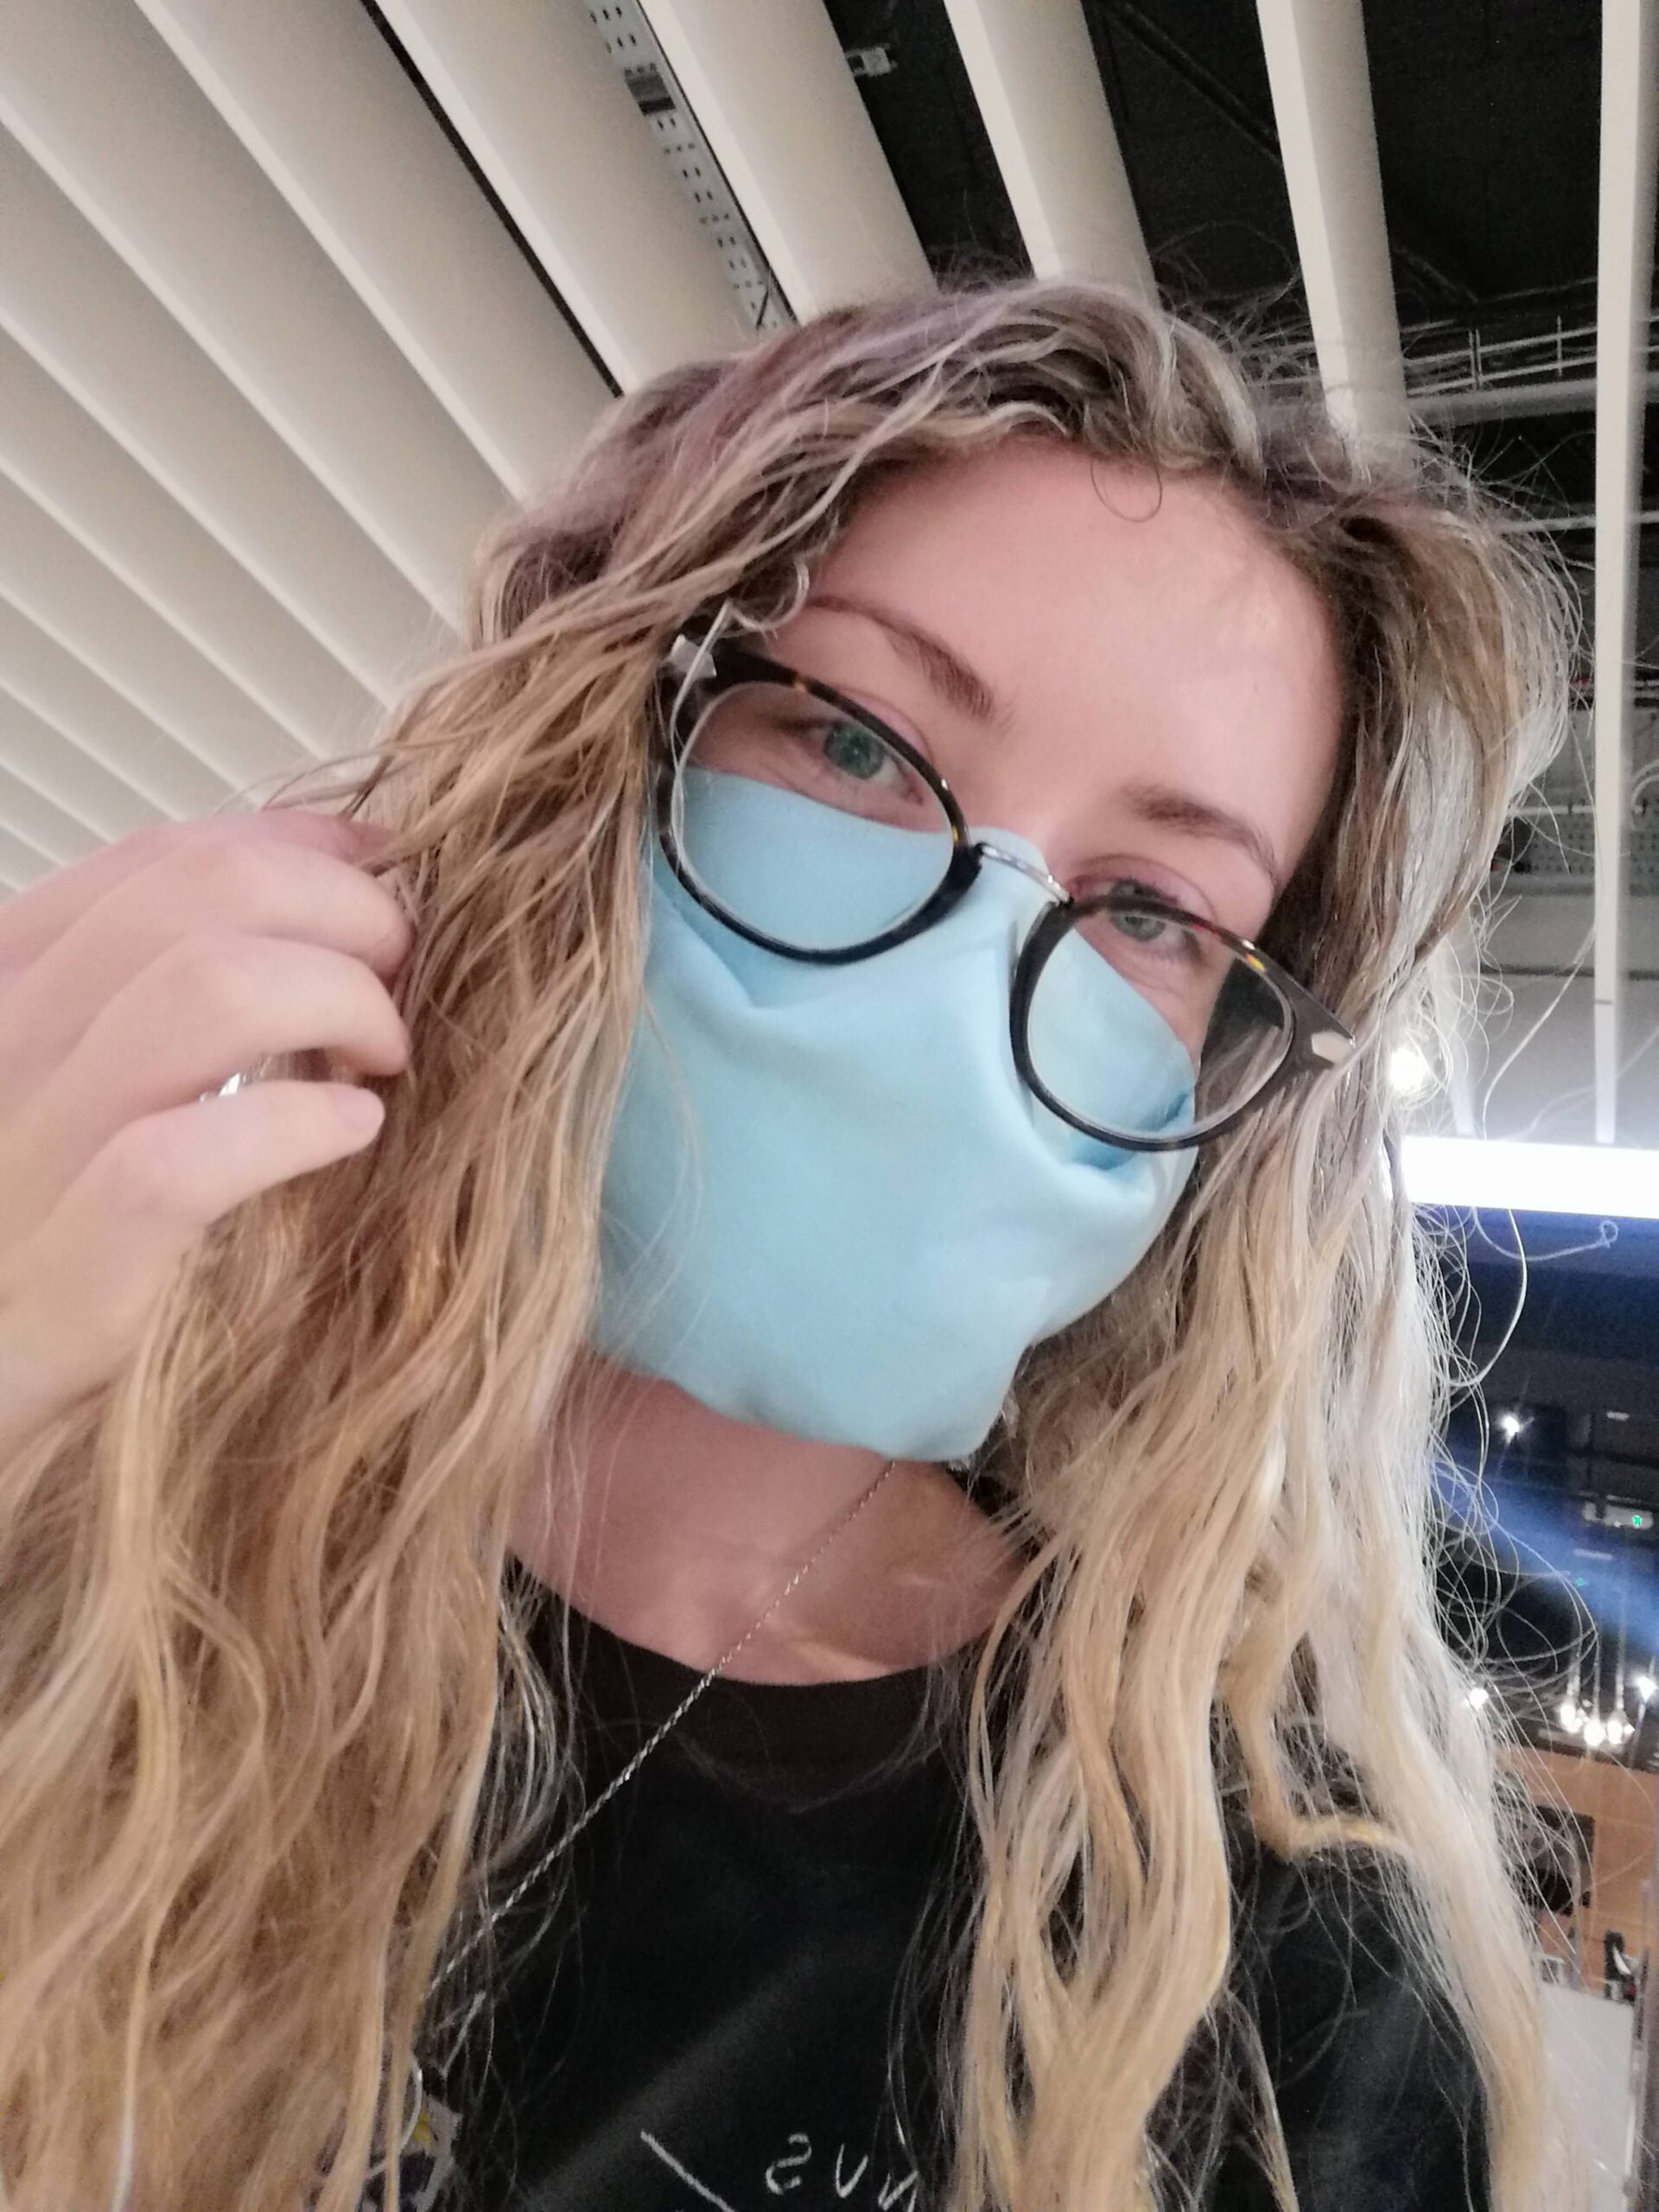 Holly in the airport wearing a face mask